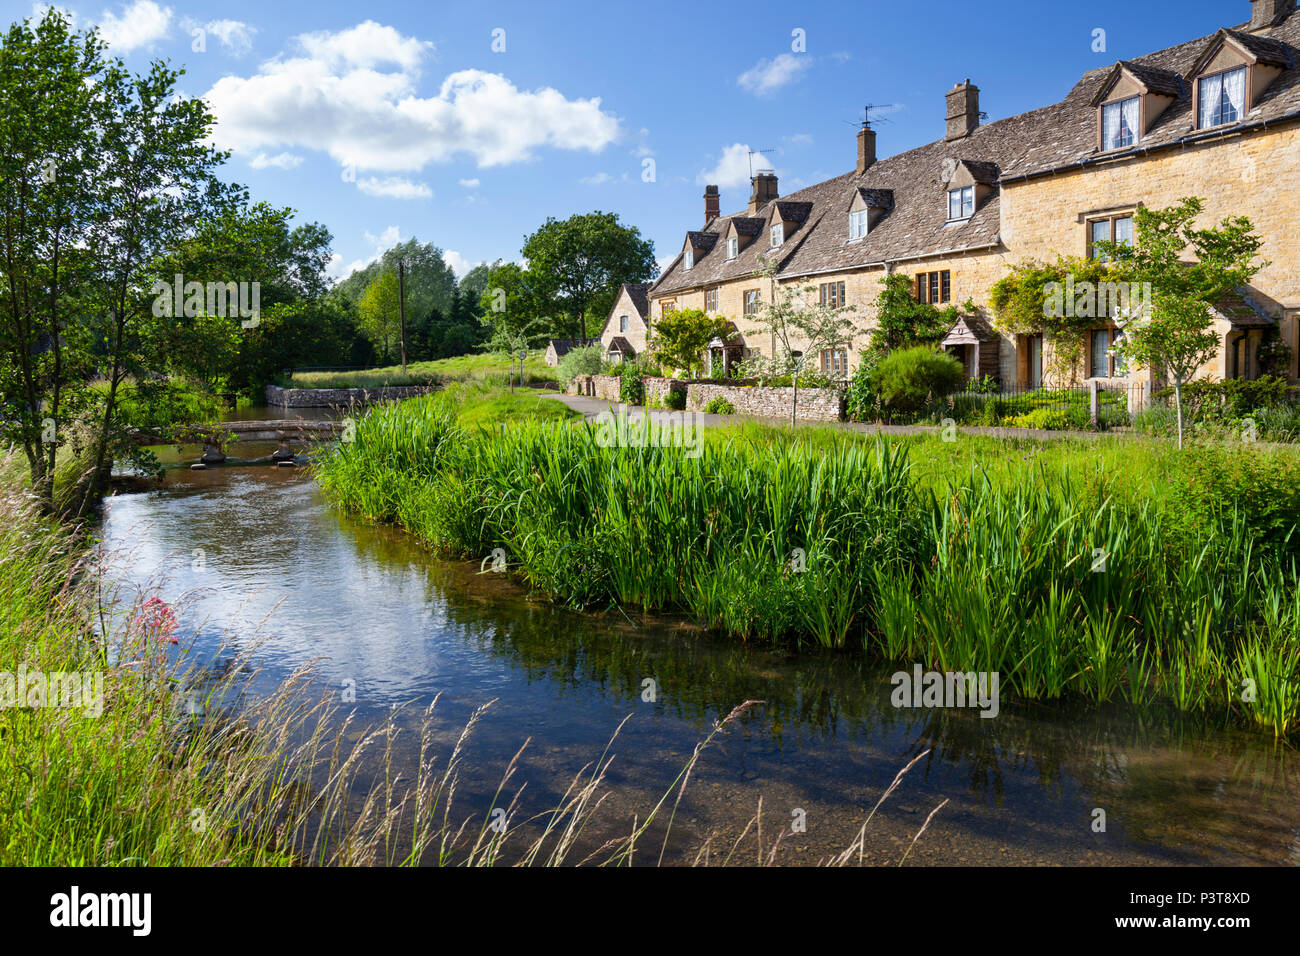 Cotswold stone cottages beside the River Eye, Lower Slaughter, The Cotswolds, Gloucestershire, England, United Kingdom, Europe Stock Photo